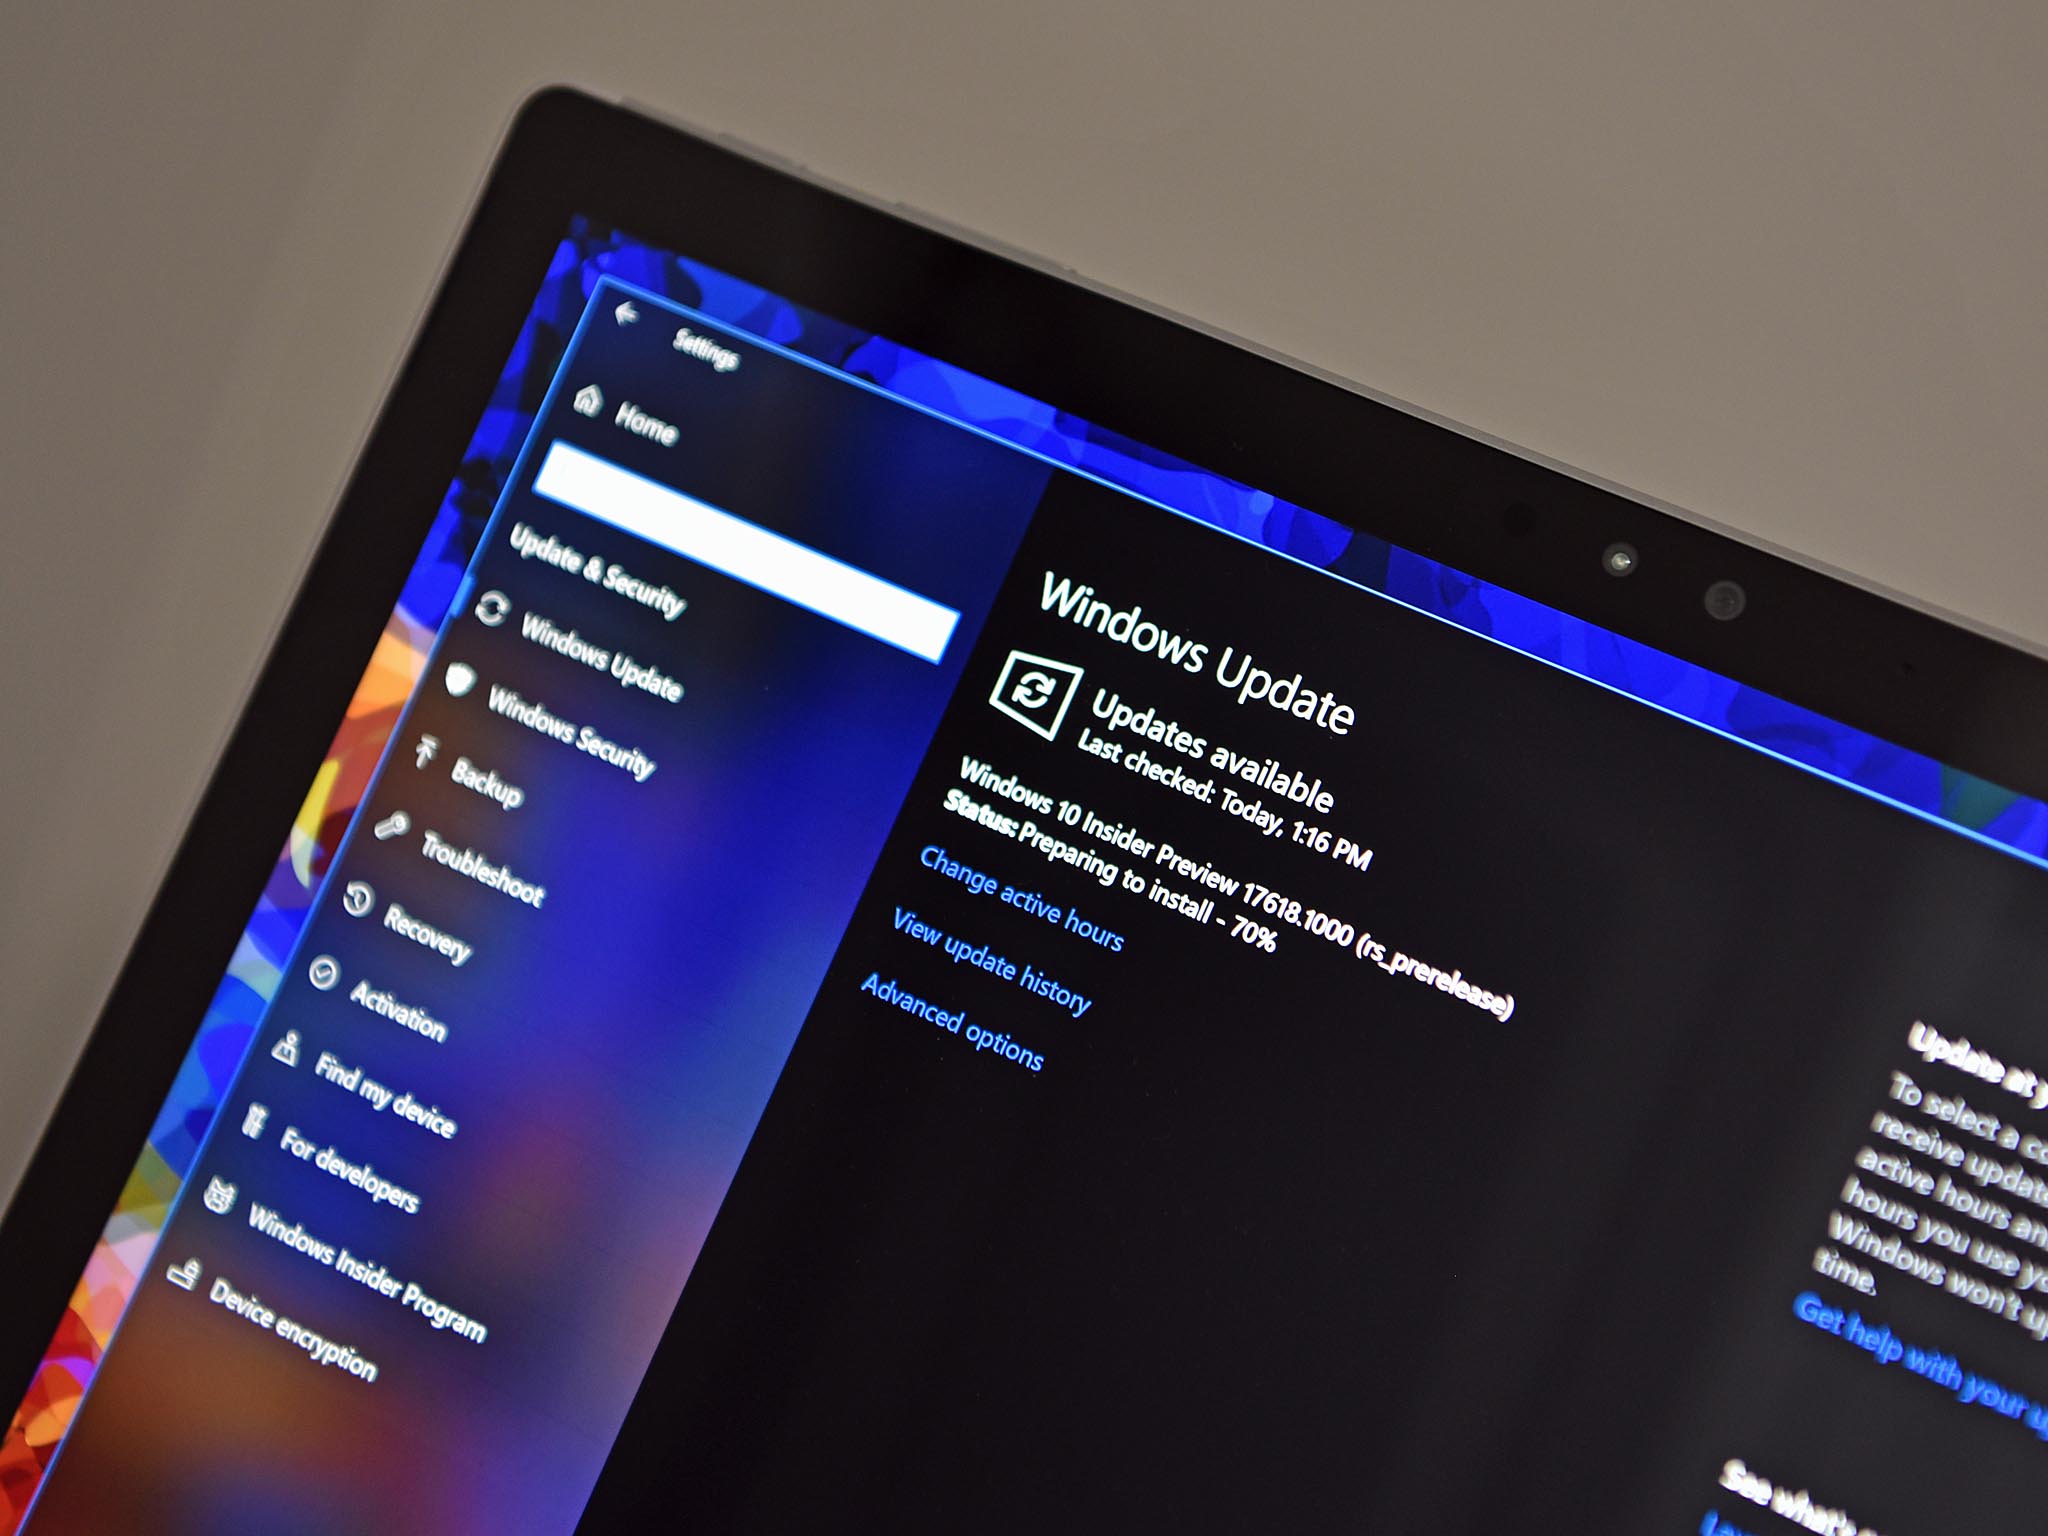 Microsoft ships Windows 10 preview build 18219 to Skip Ahead Insiders